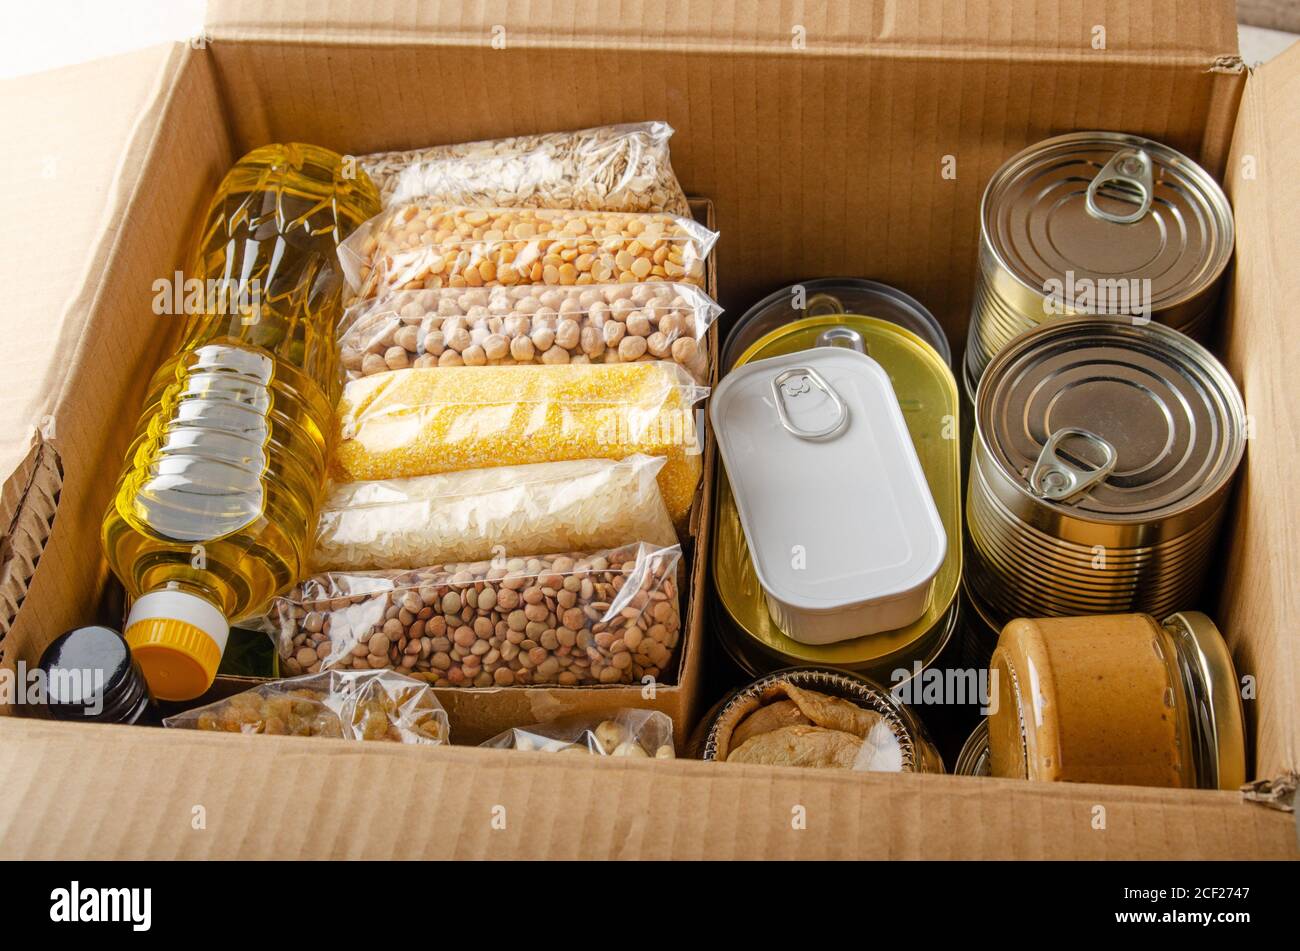 Set of uncooked foods in carton box prepared for disaster emergency conditions or giving away closeup view. Stock Photo